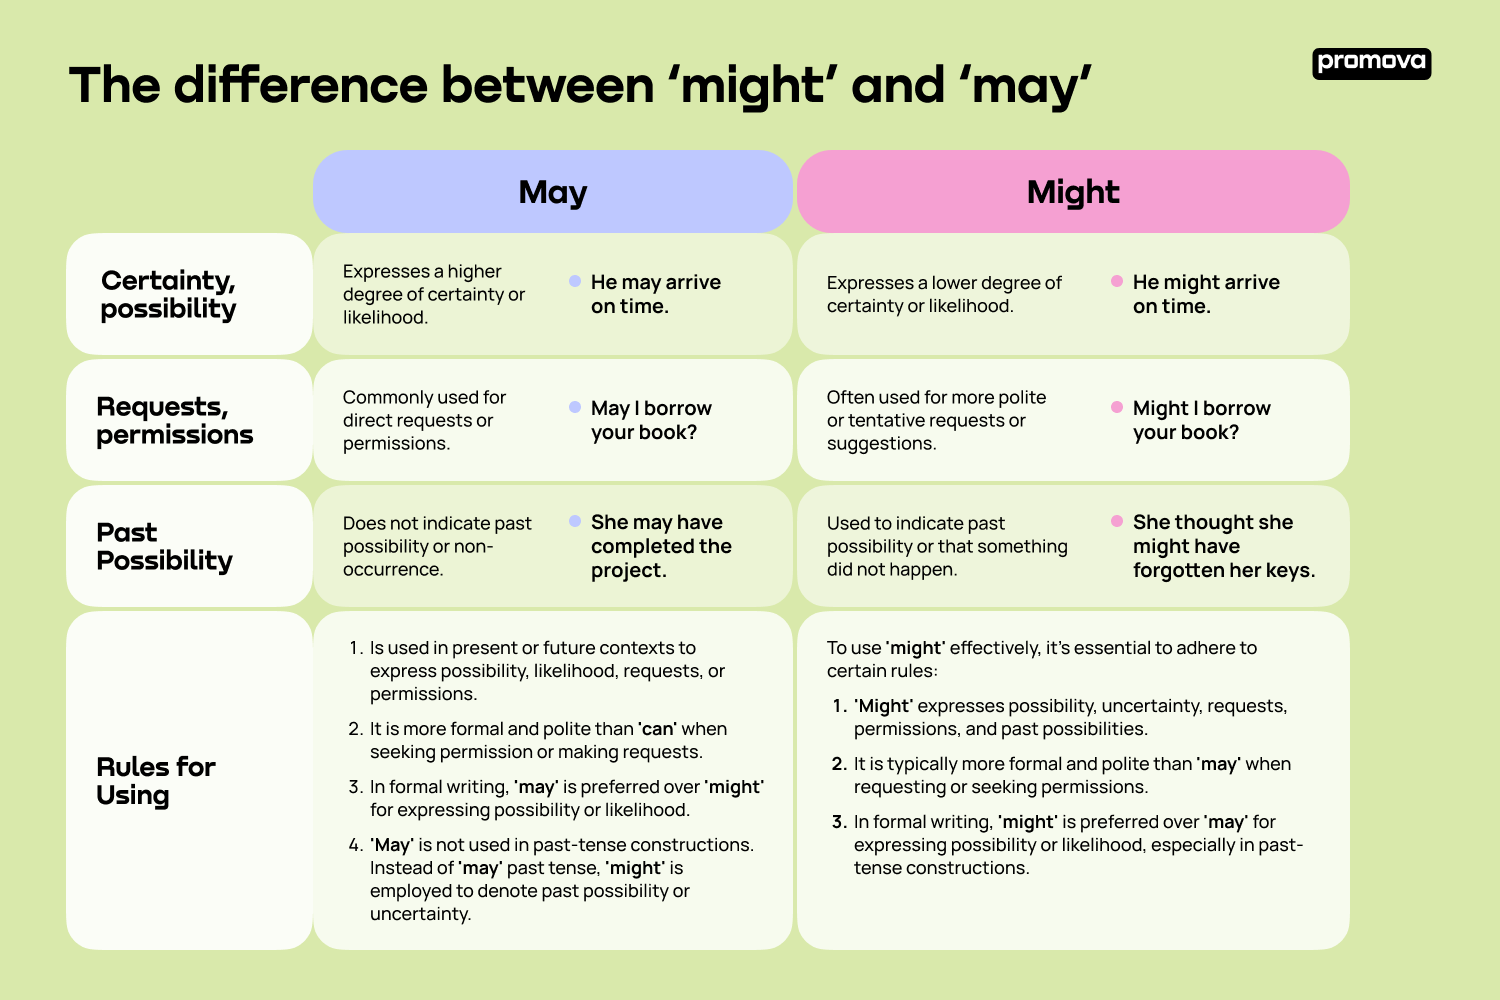 Discovering the Difference Between 'Might' vs. 'May'